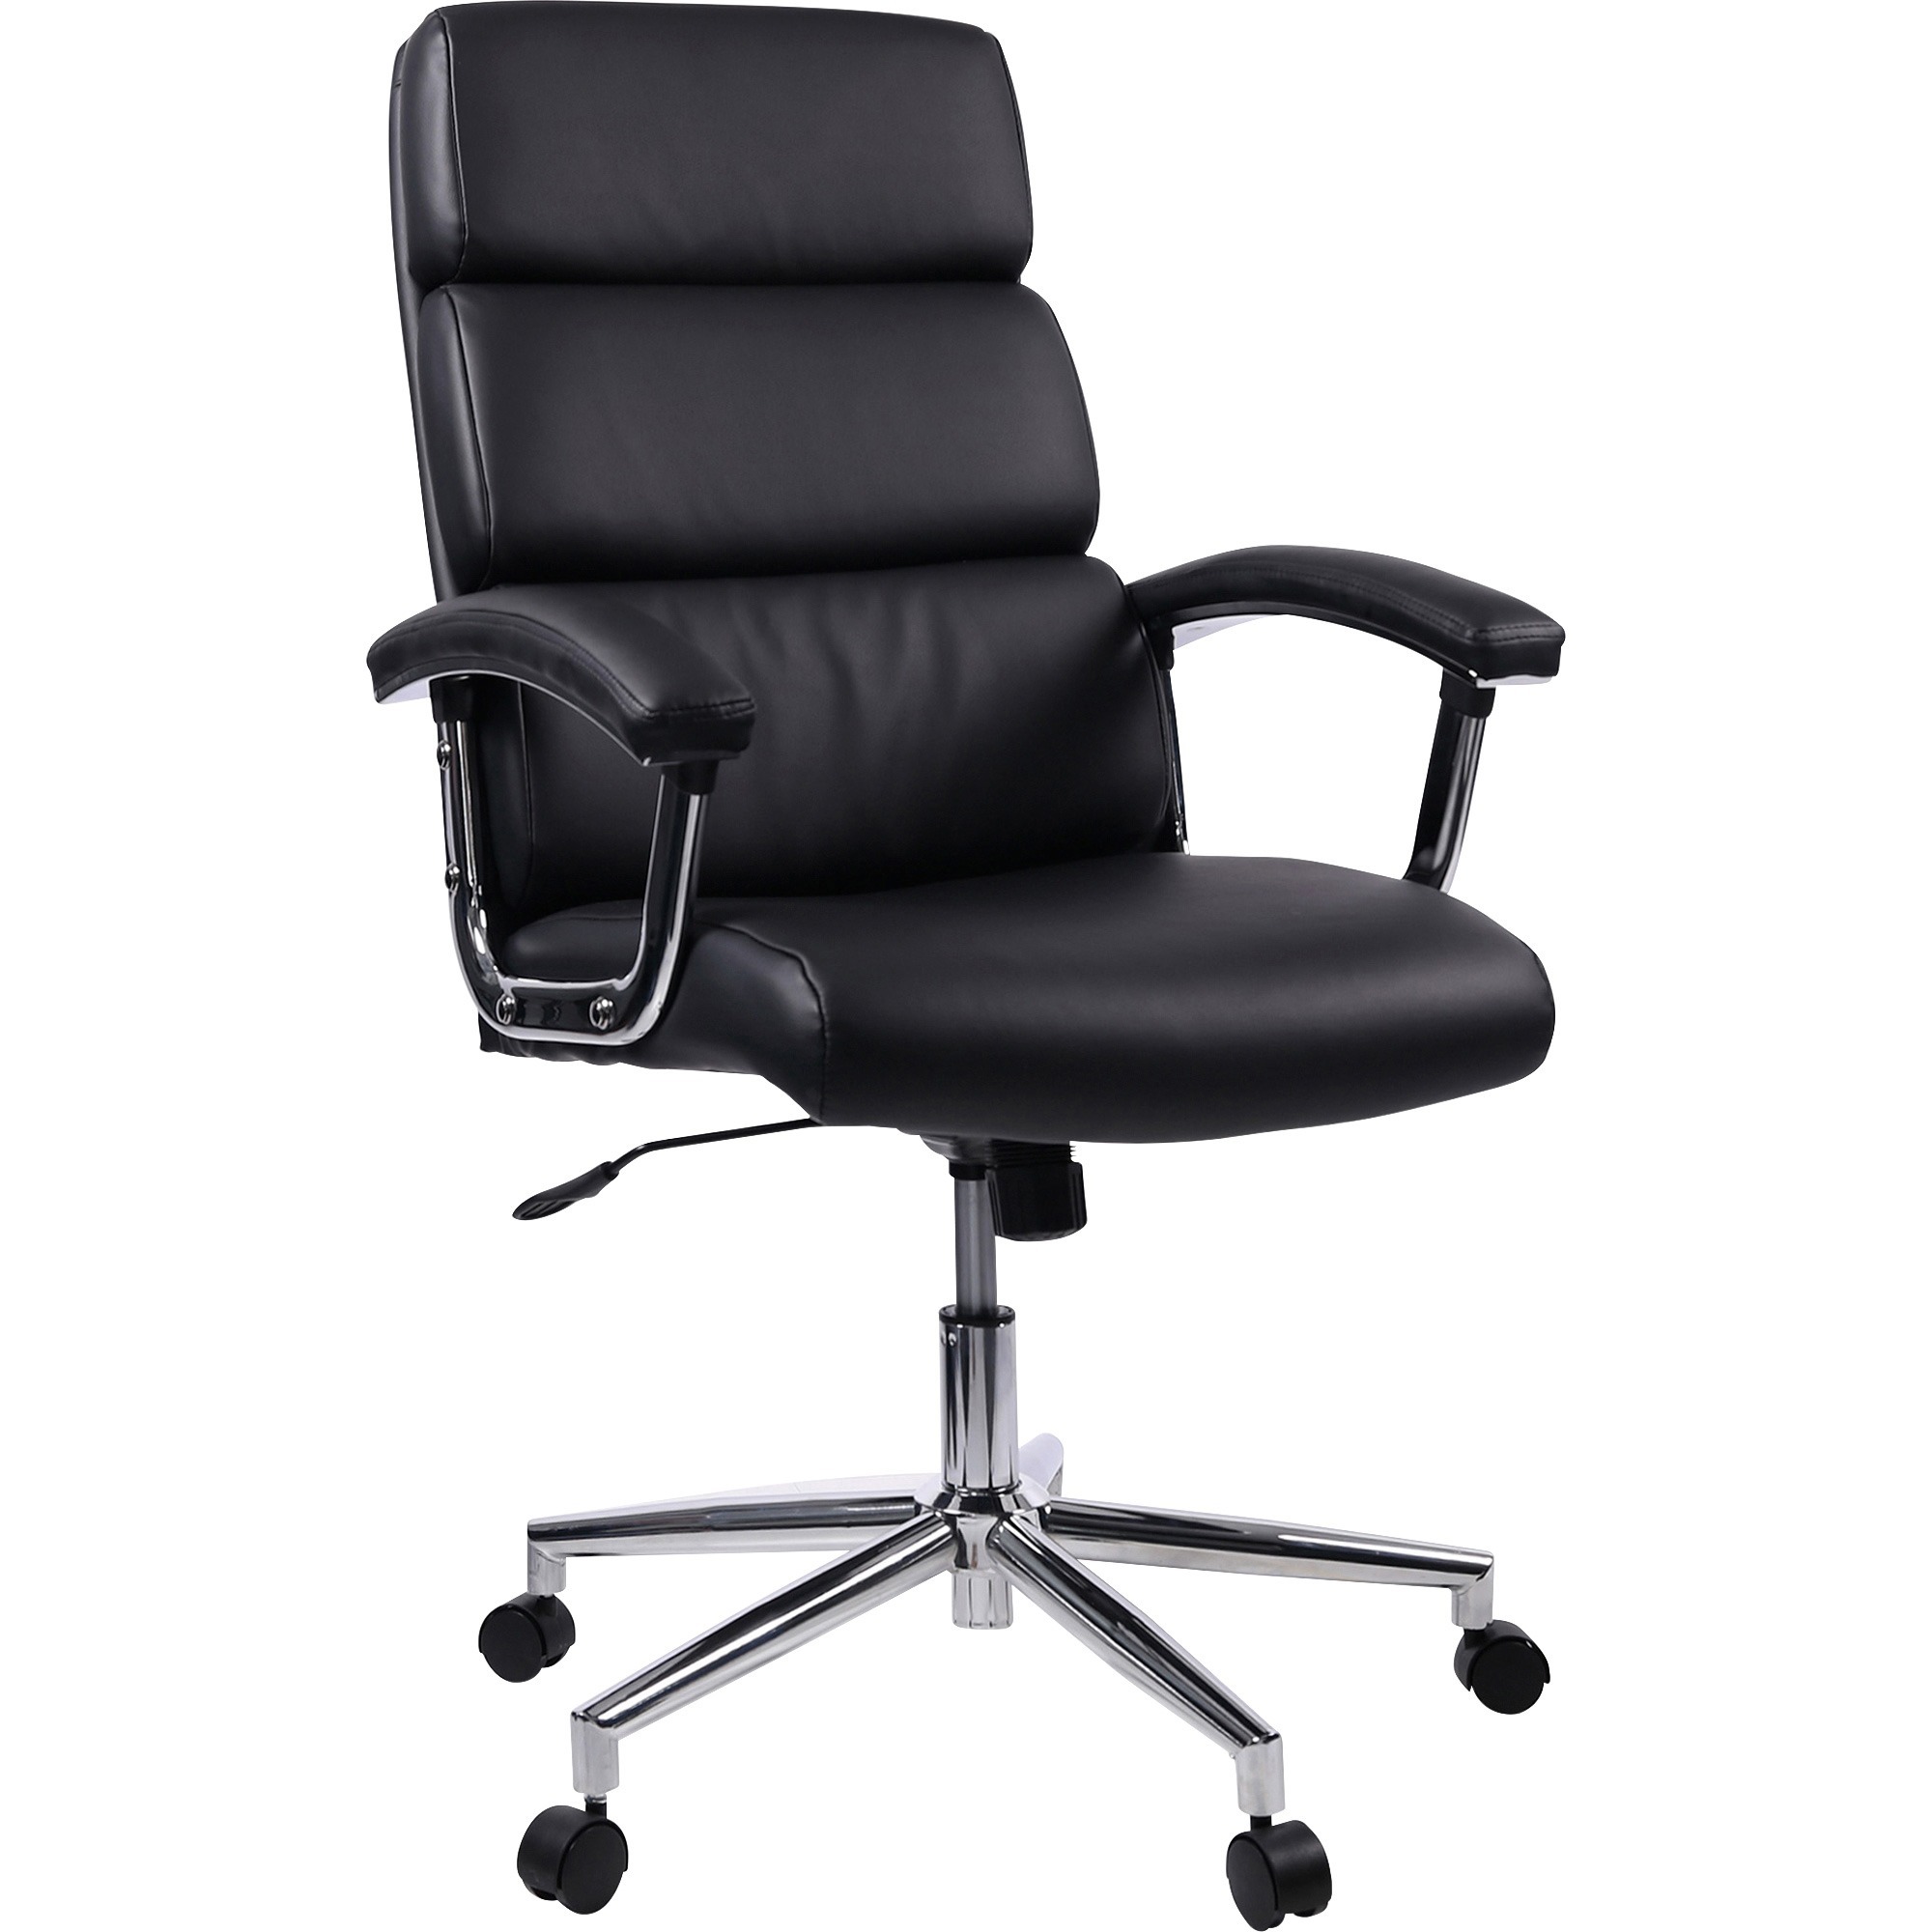 LLR 20018 | Lorell Leather High-back Chair - Lorell Furniture